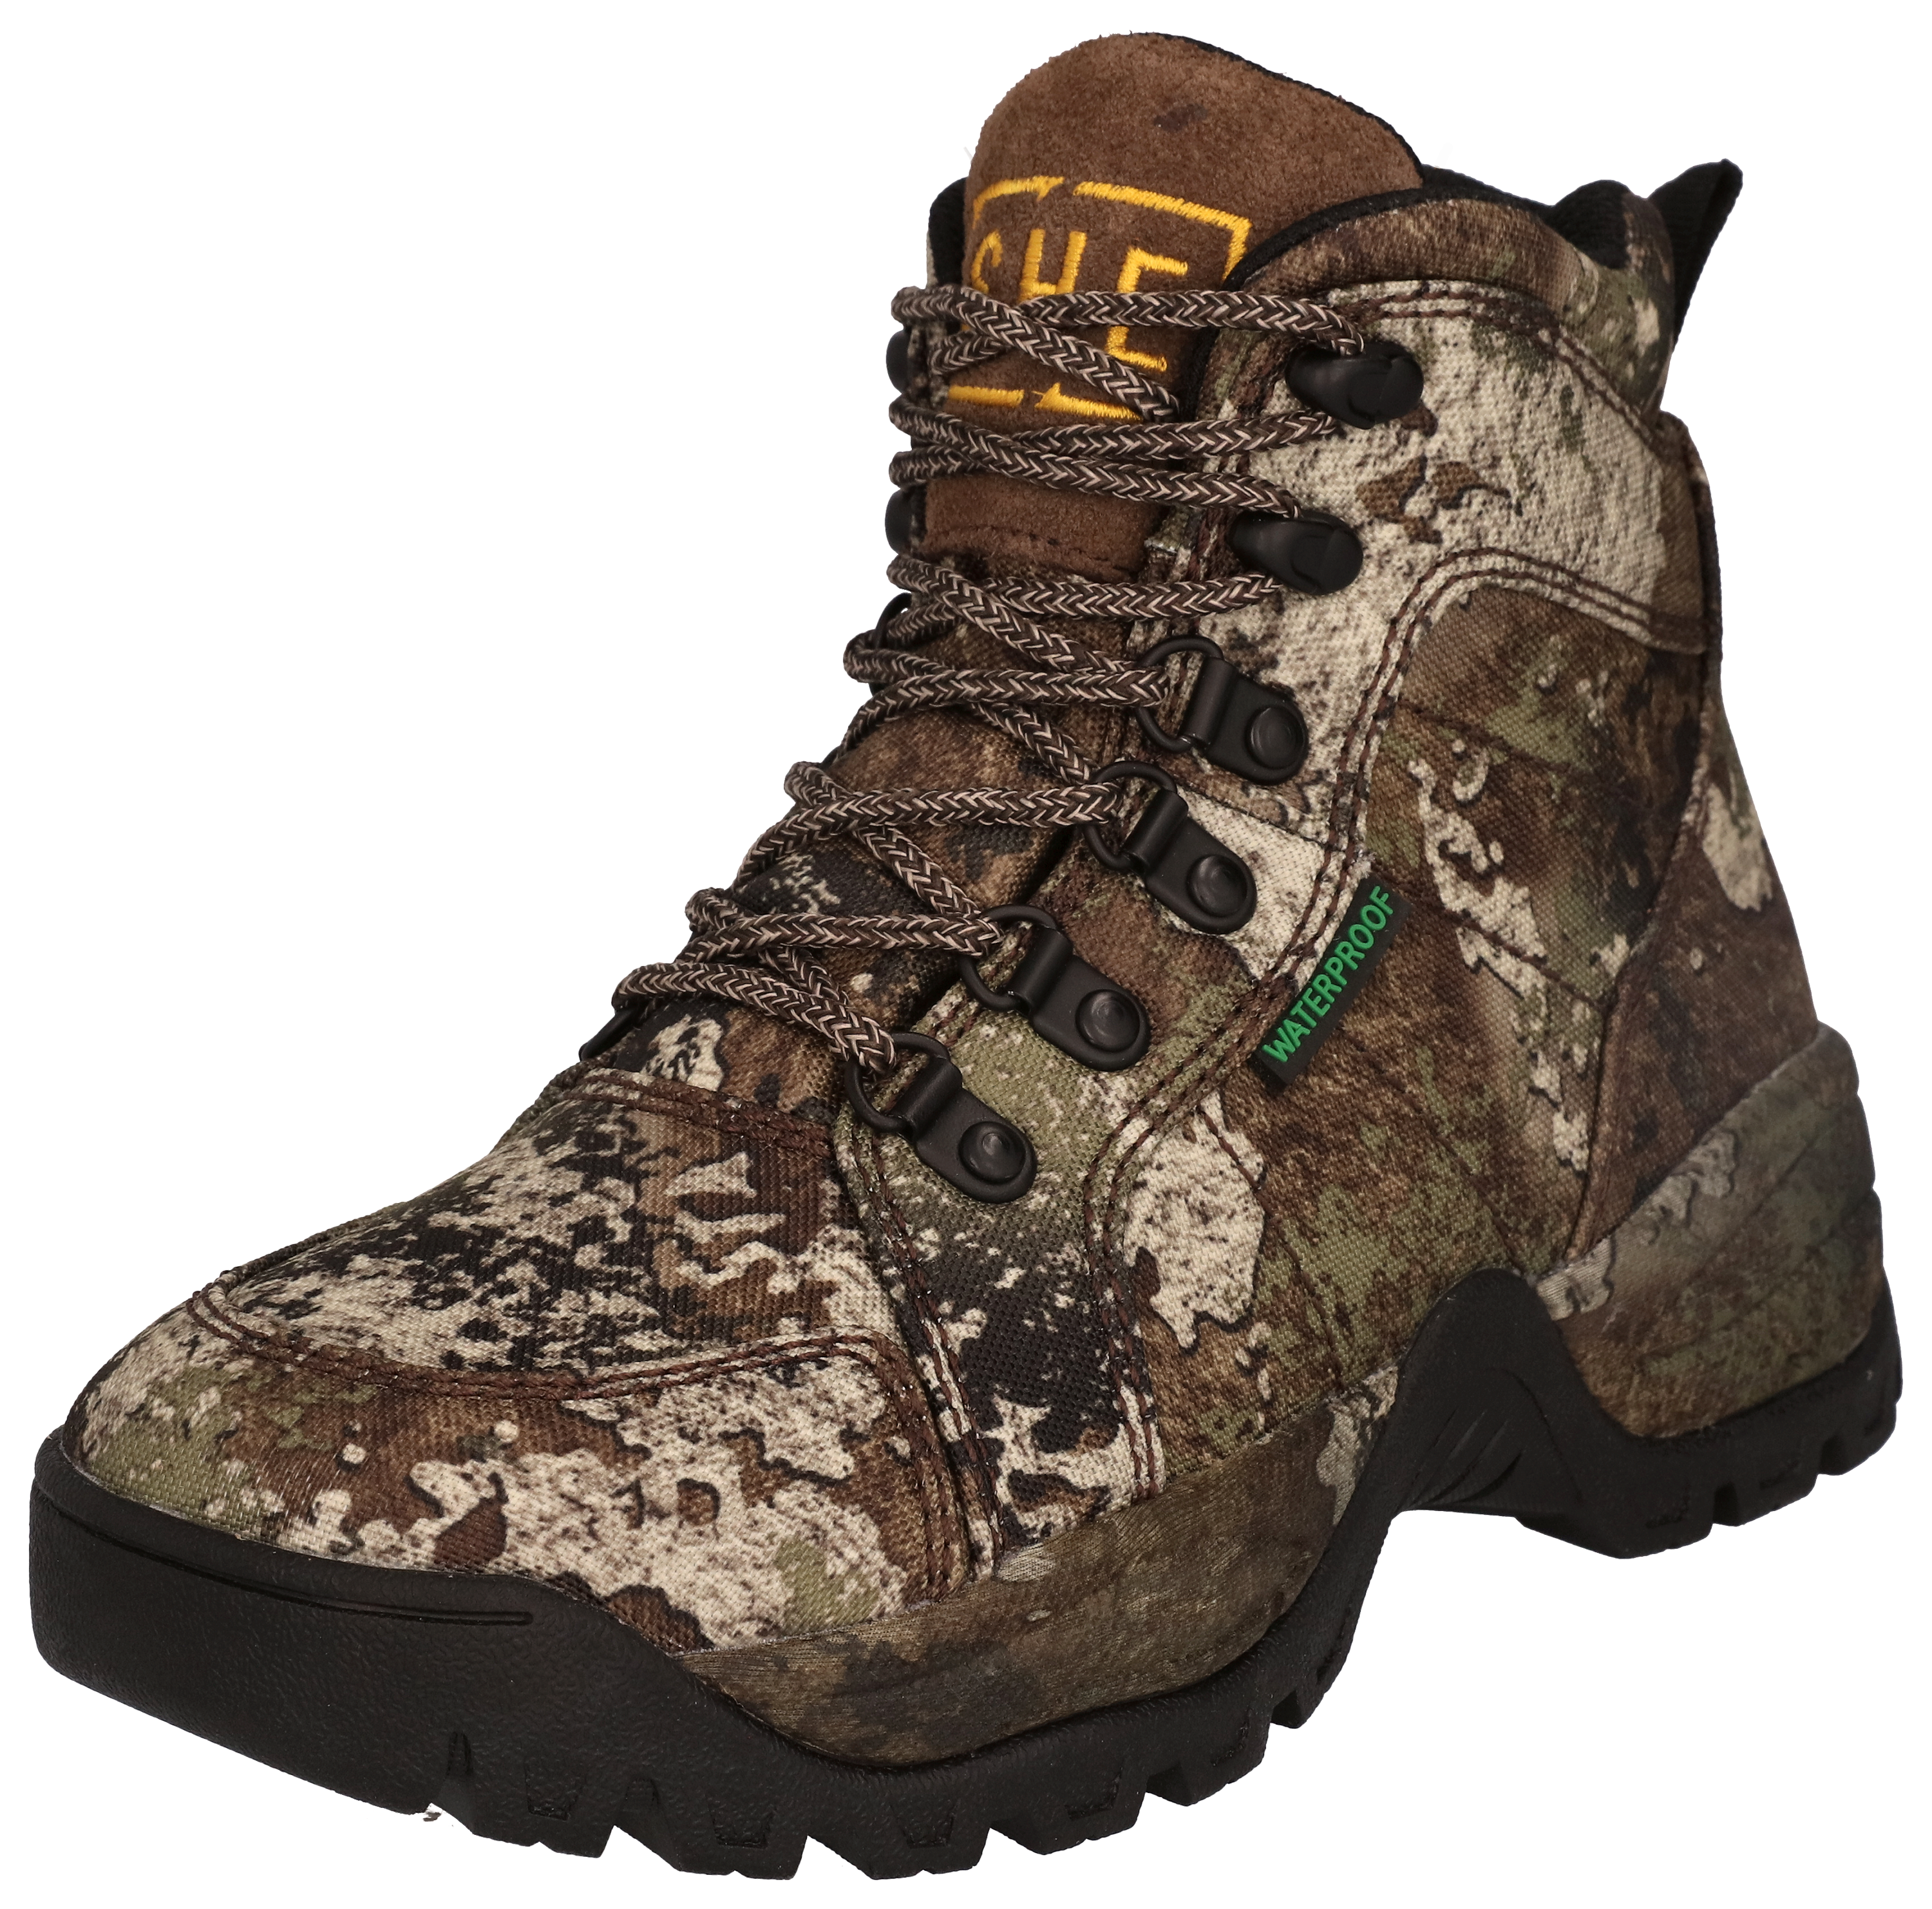 SHE Outdoor Timber Buck Waterproof Hunting Boots for Ladies - TrueTimber Strata - 9M